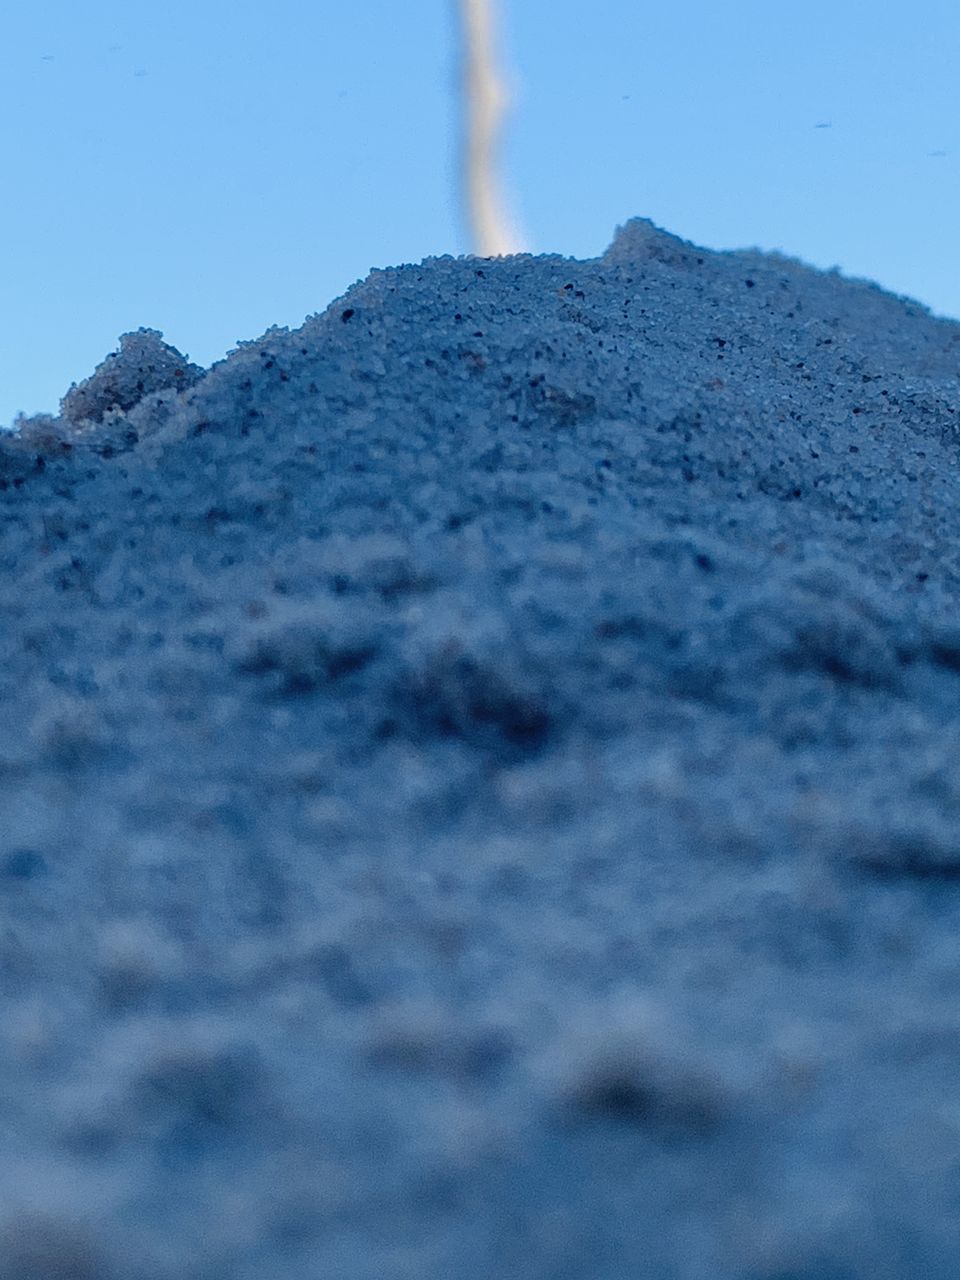 CLOSE-UP OF SNOW COVERED LAND AGAINST BLUE SKY